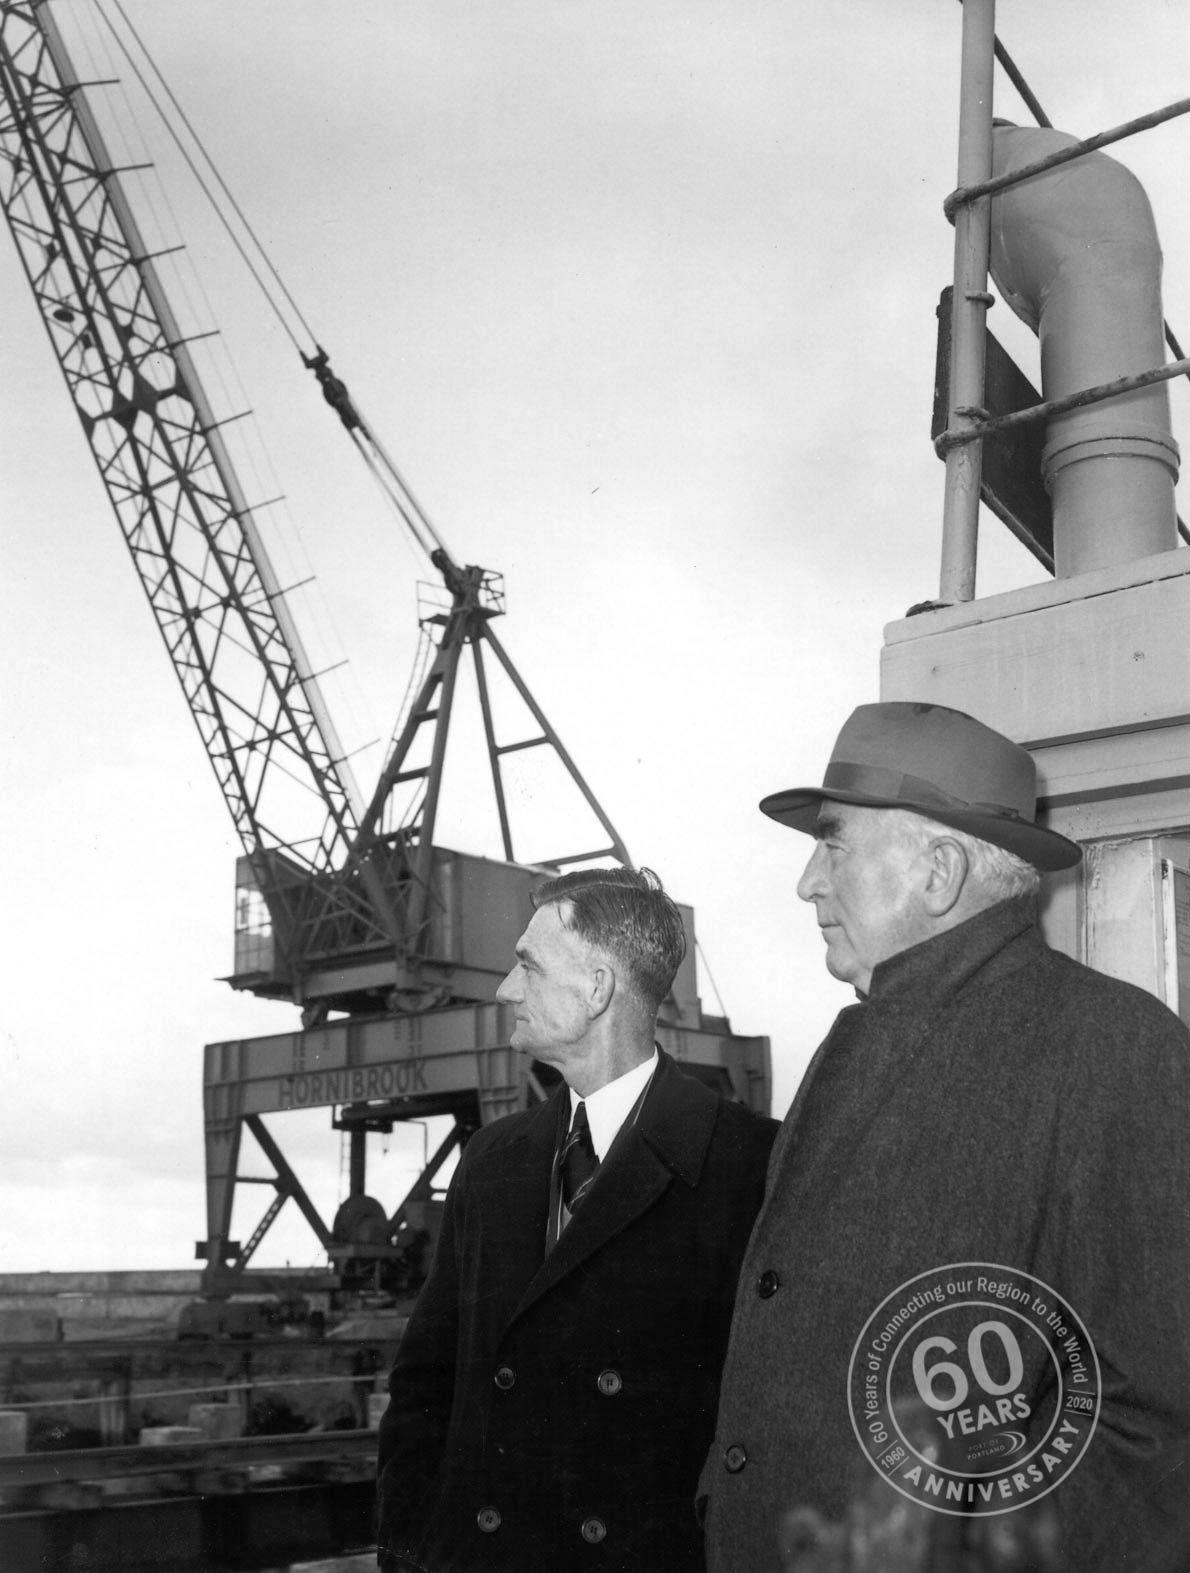 Captain Brown with Sir Robert Menzies inspecting harbor works, 18 July 1958.